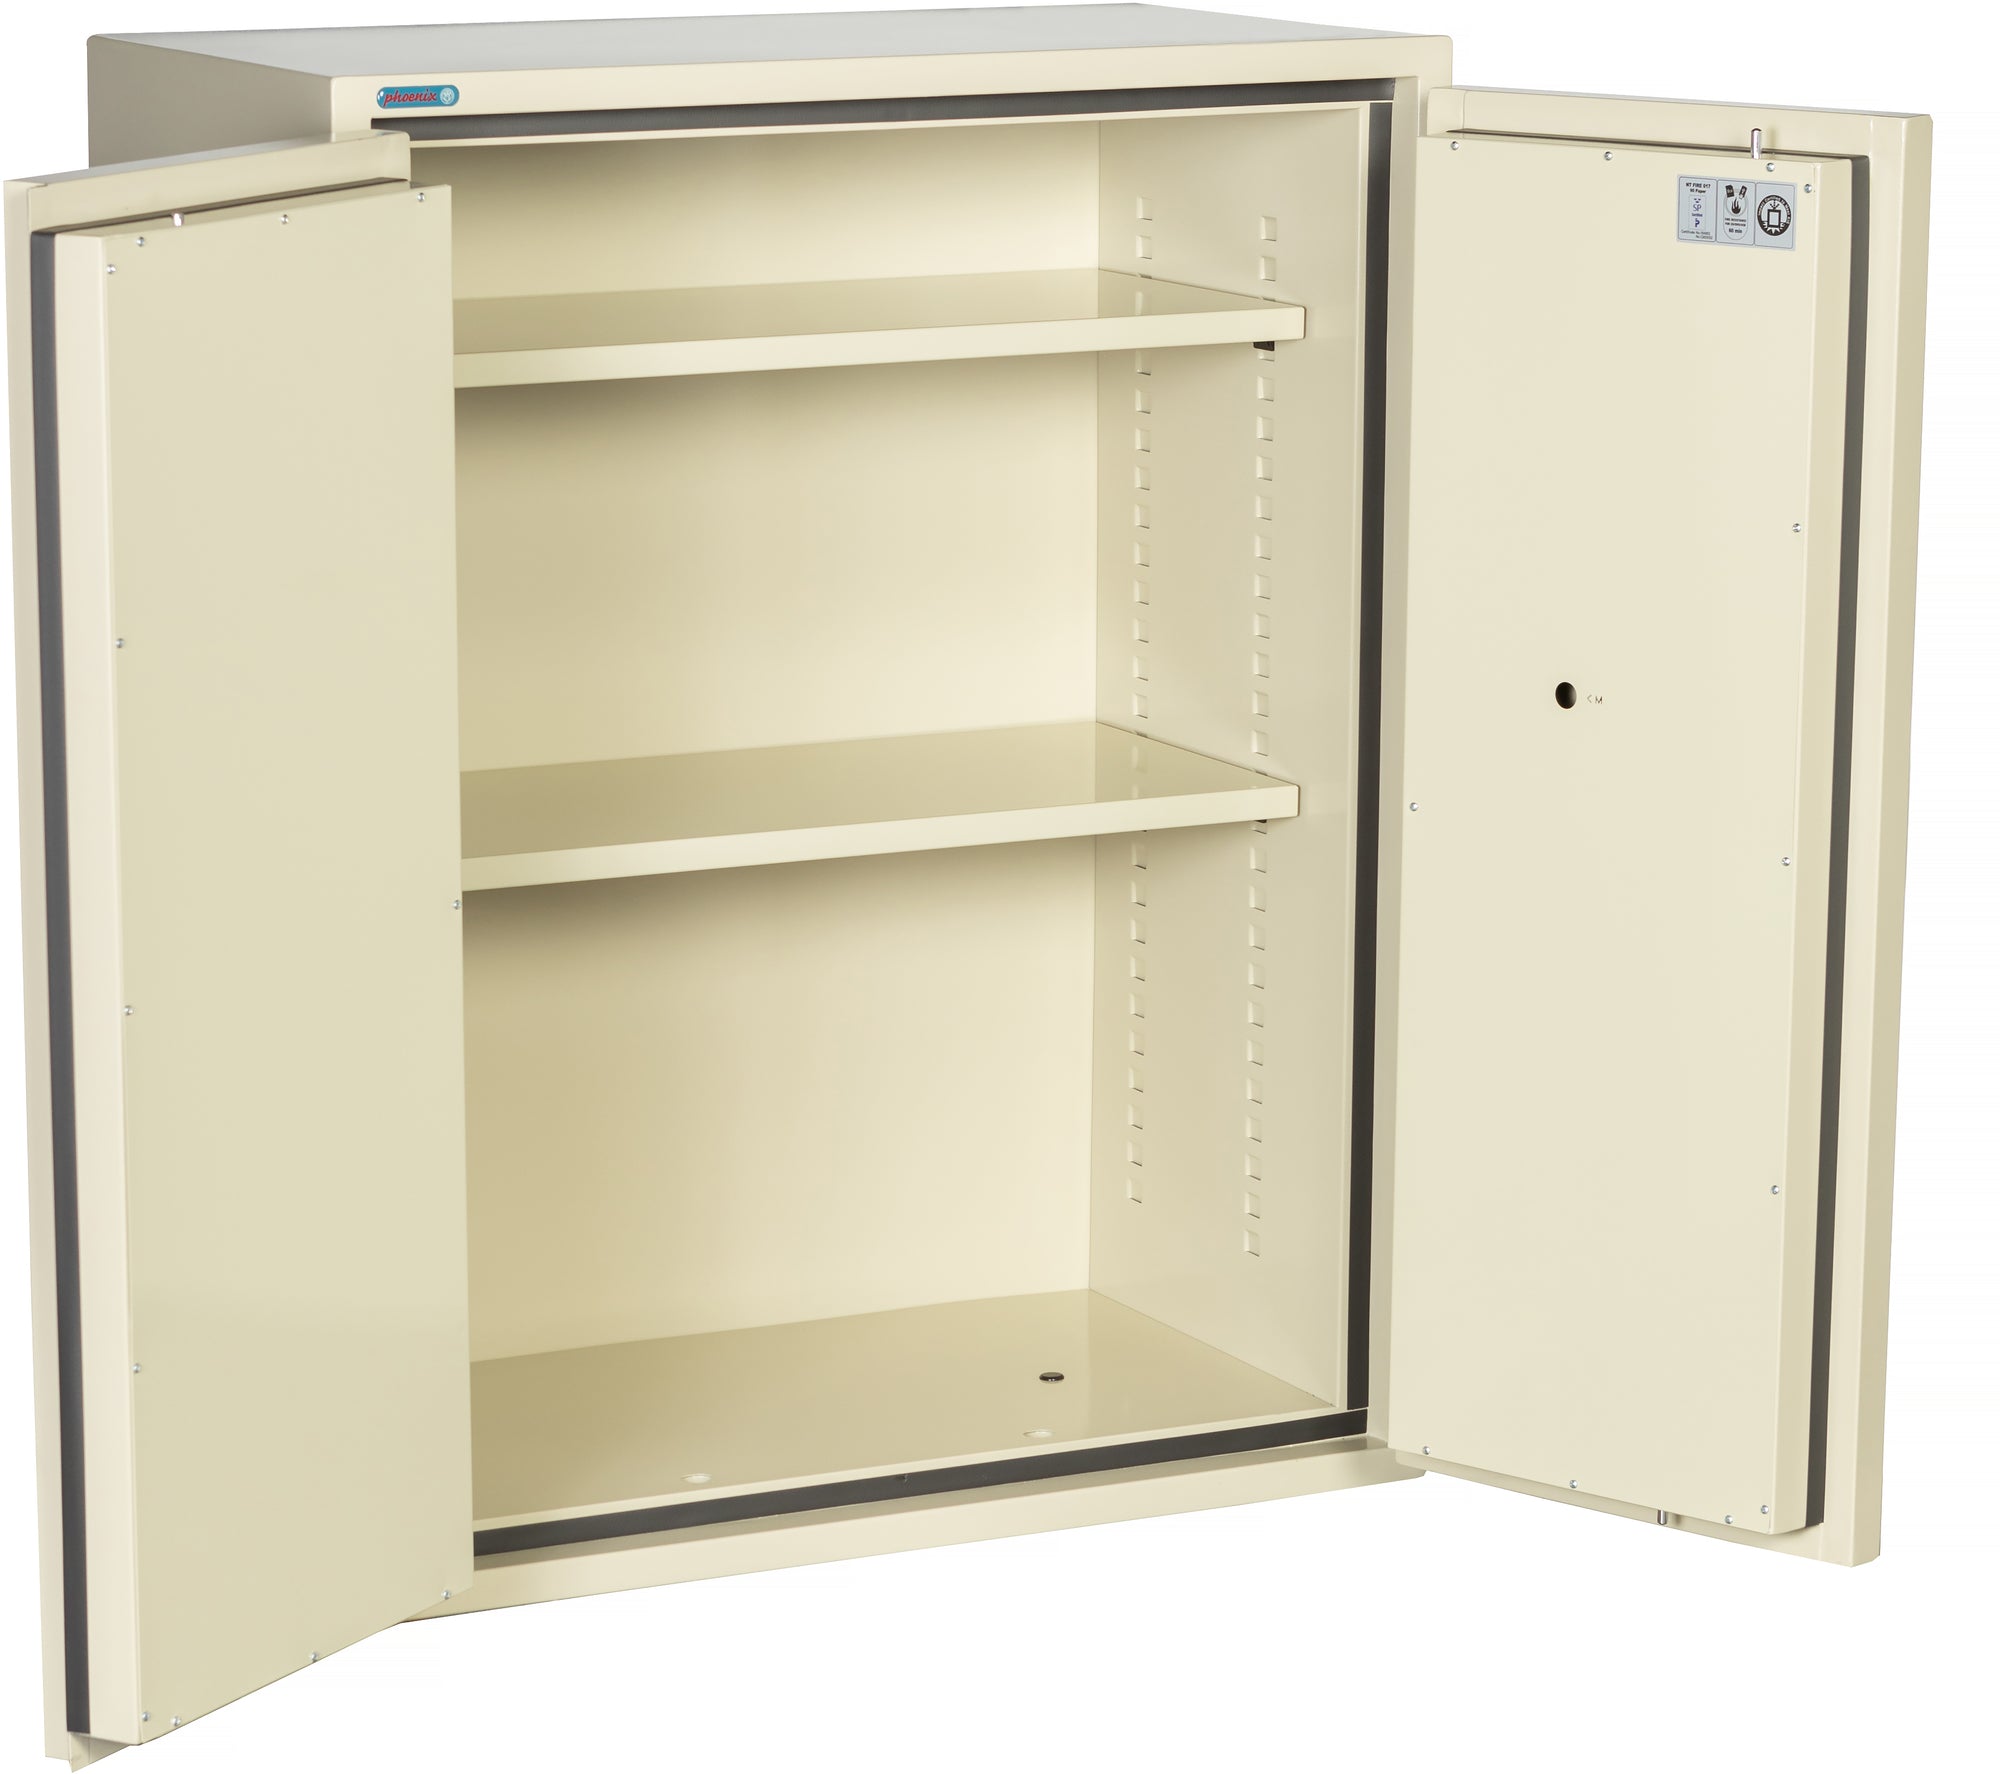 Phoenix FRSC36 Fire Fighter 90 Minute Fire Rated Storage Cabinet